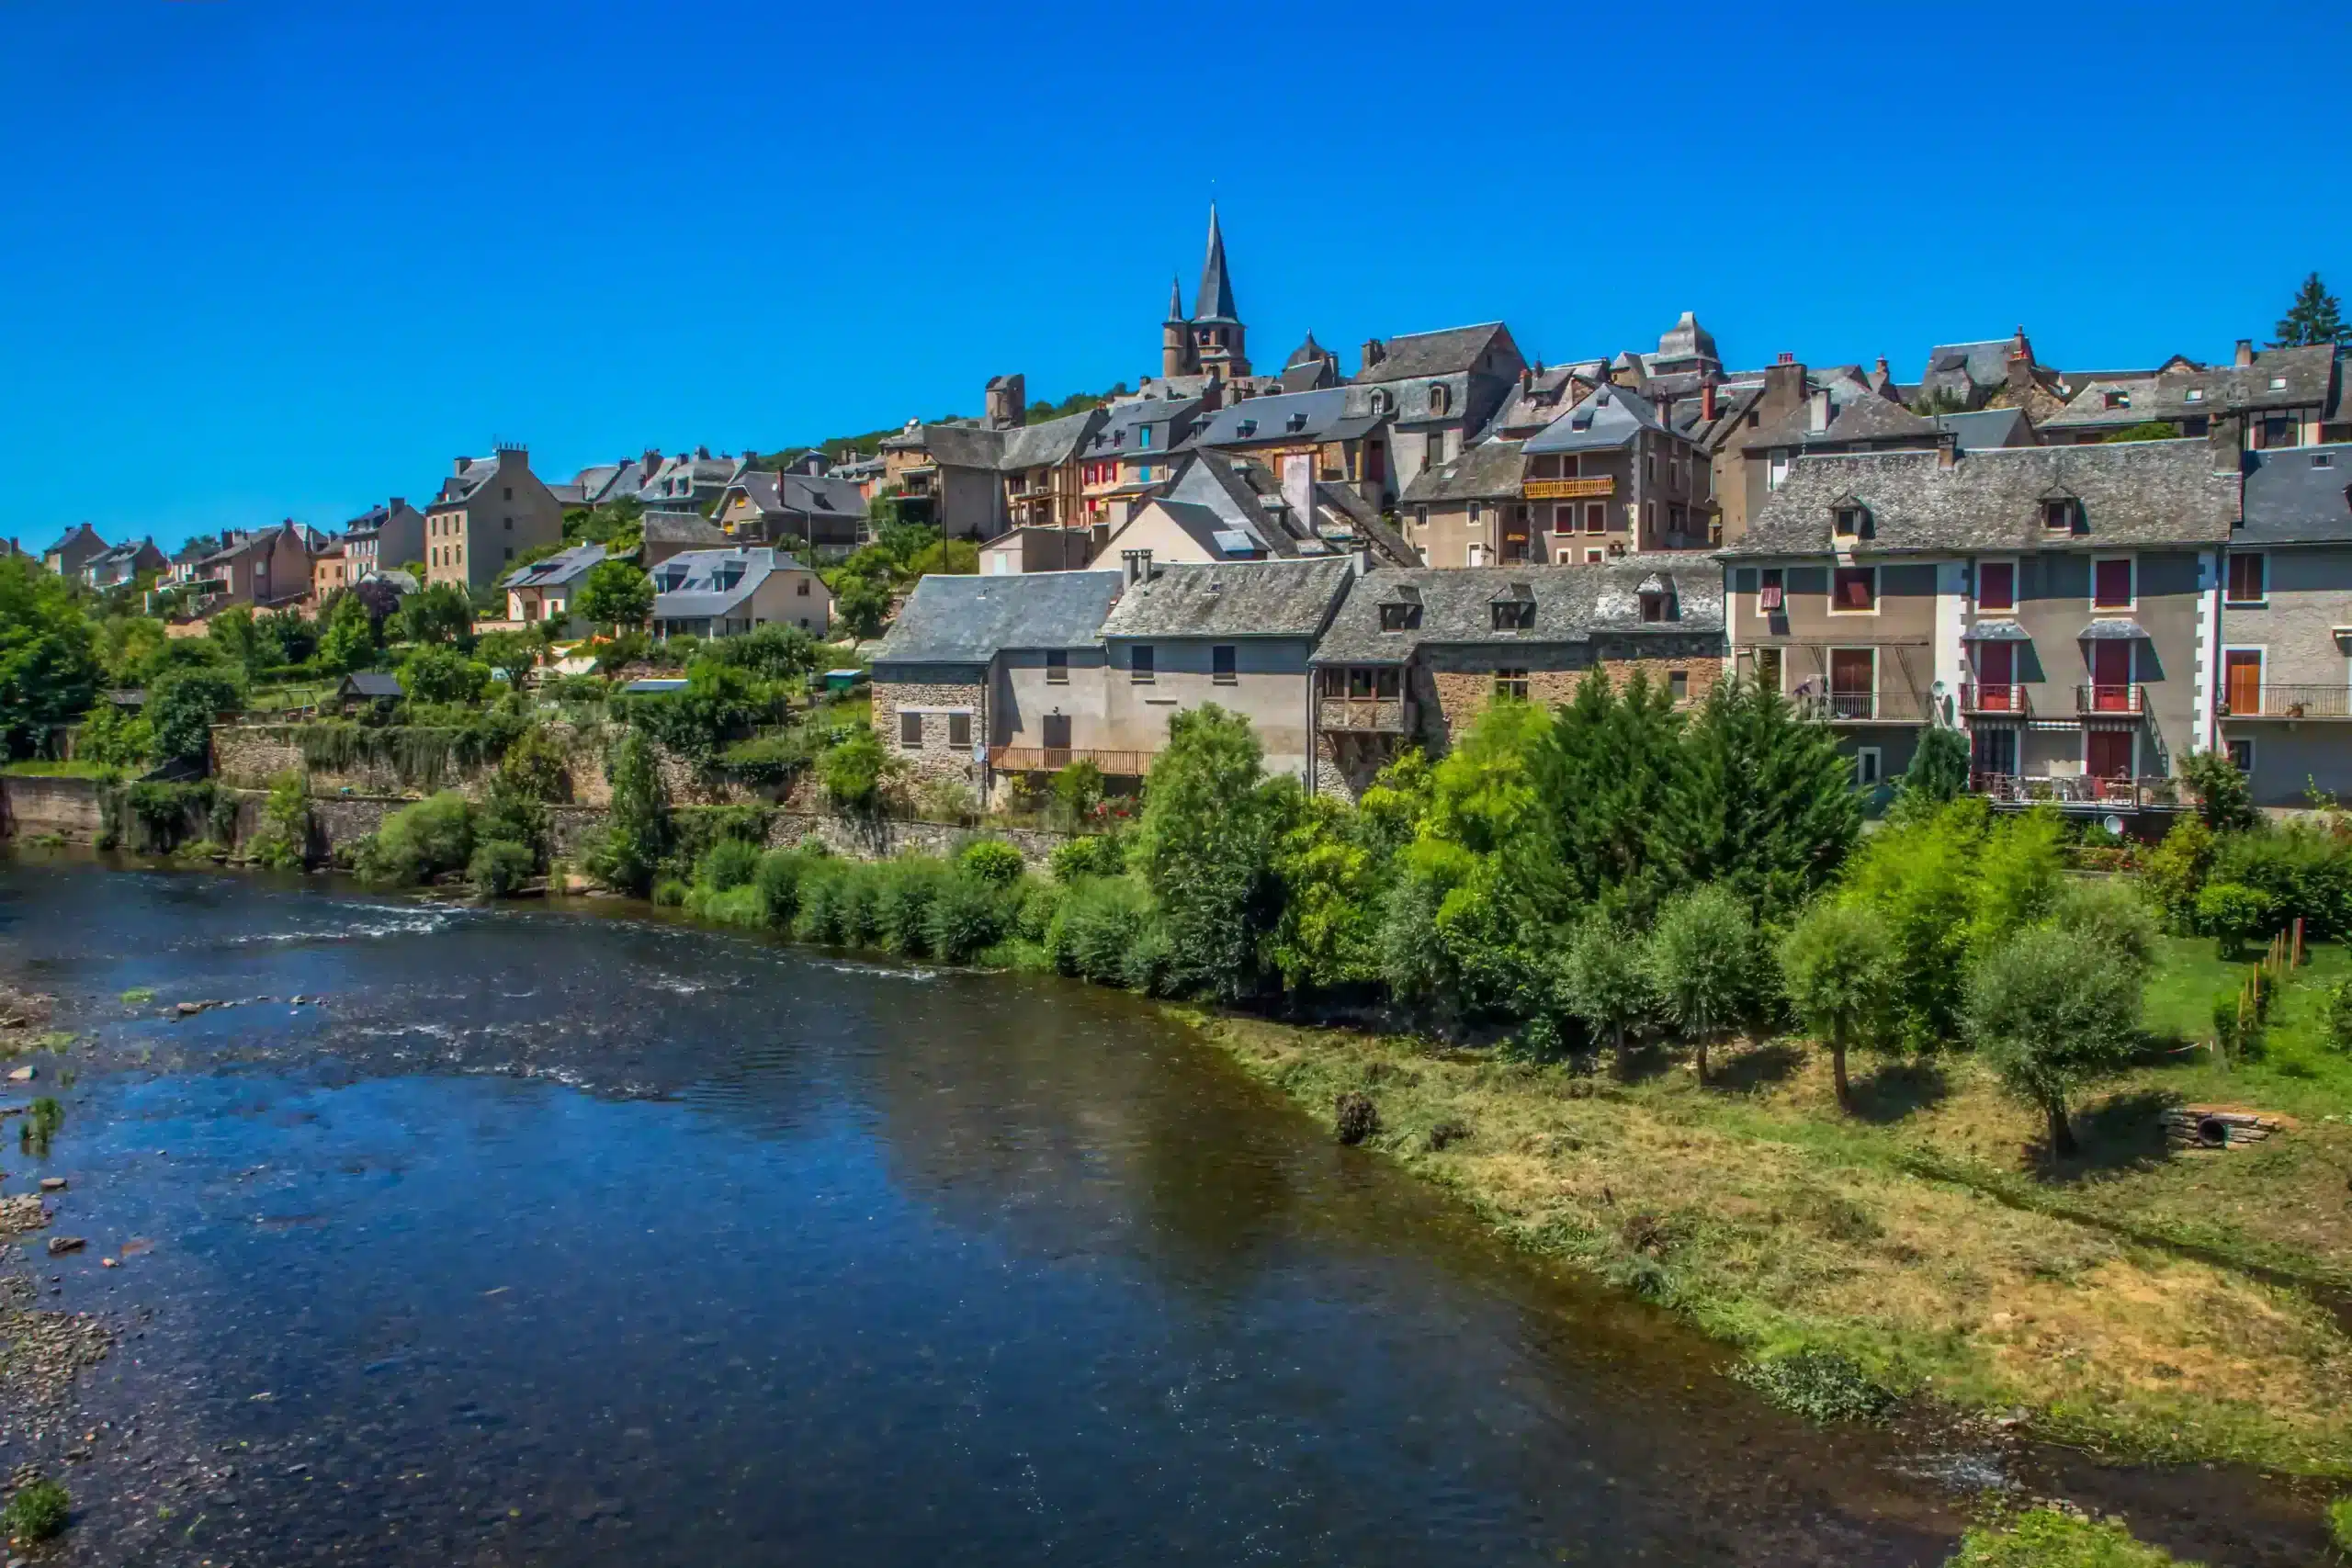 Village of Saint Côme d' Olt in Aveyron on the banks of the river Lot in France